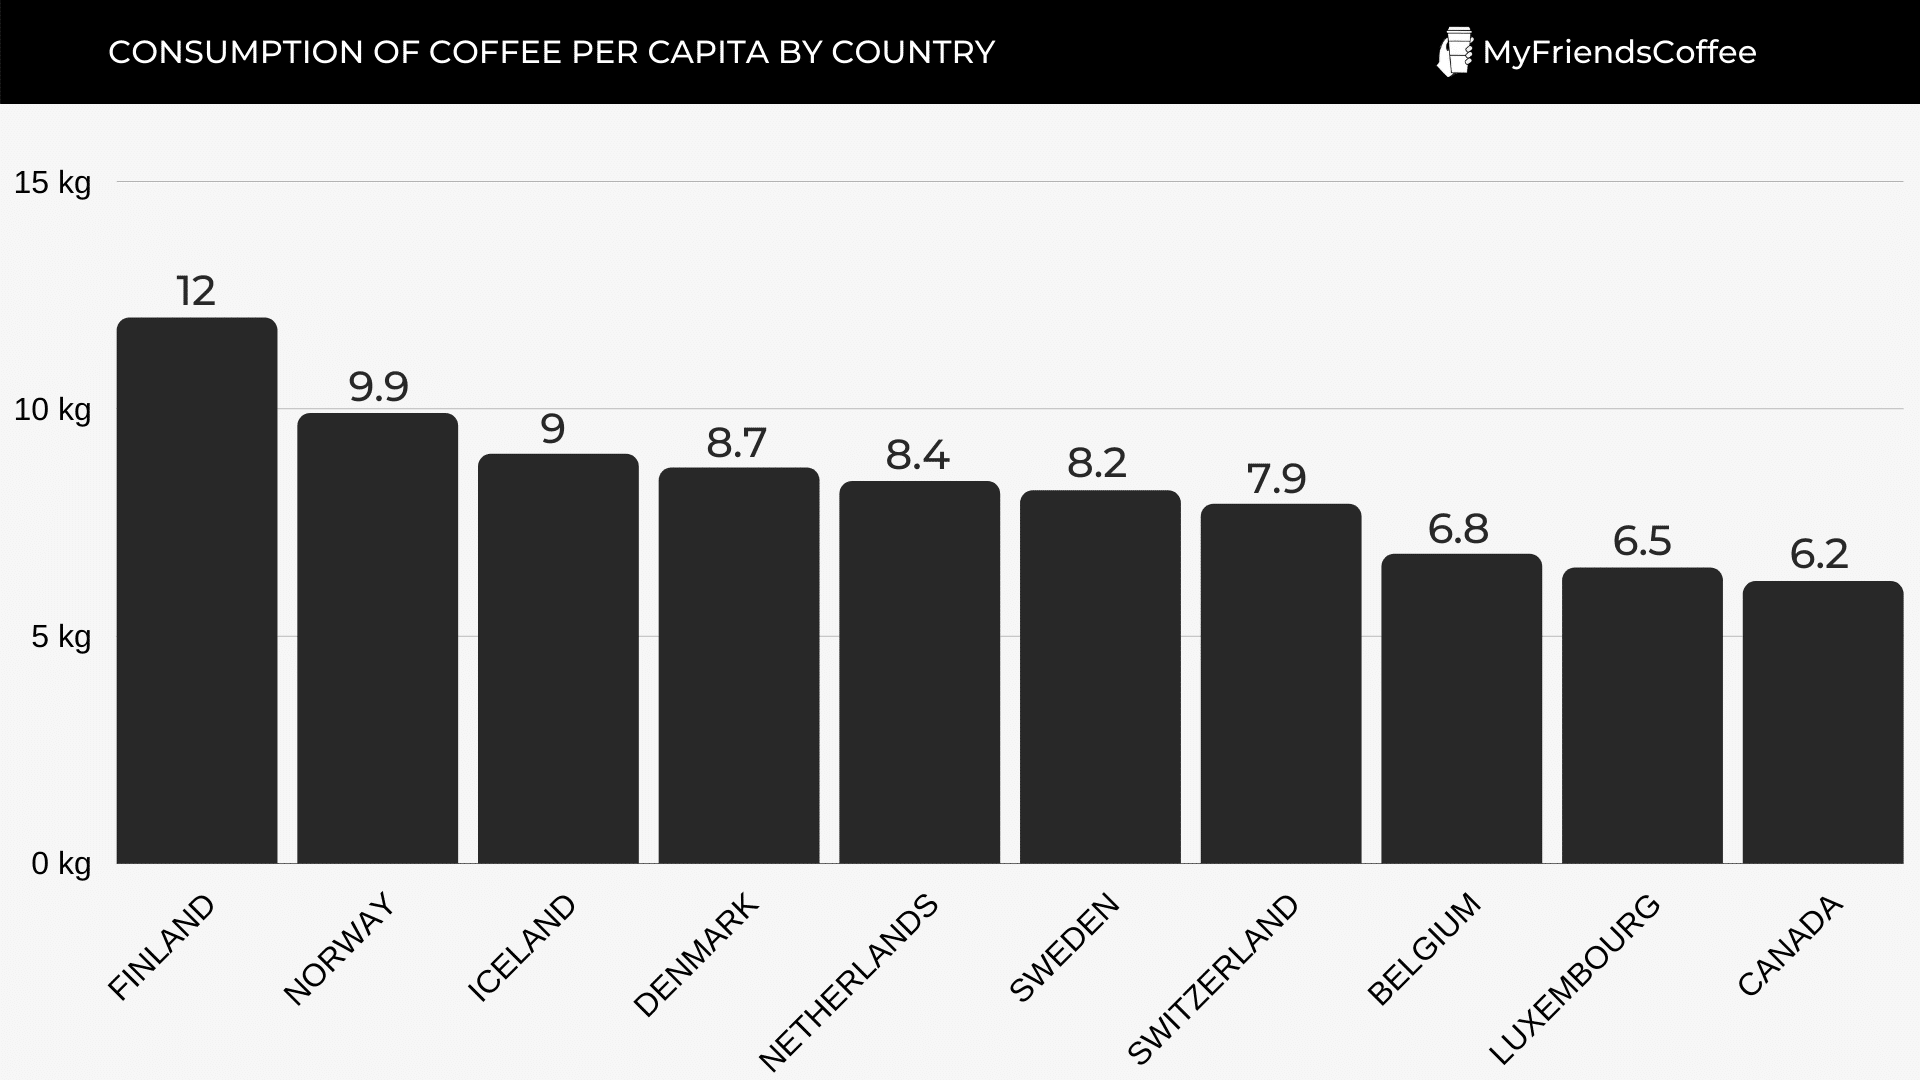 CONSUMPTION OF COFFEE PER CAPITA BY COUNTRY